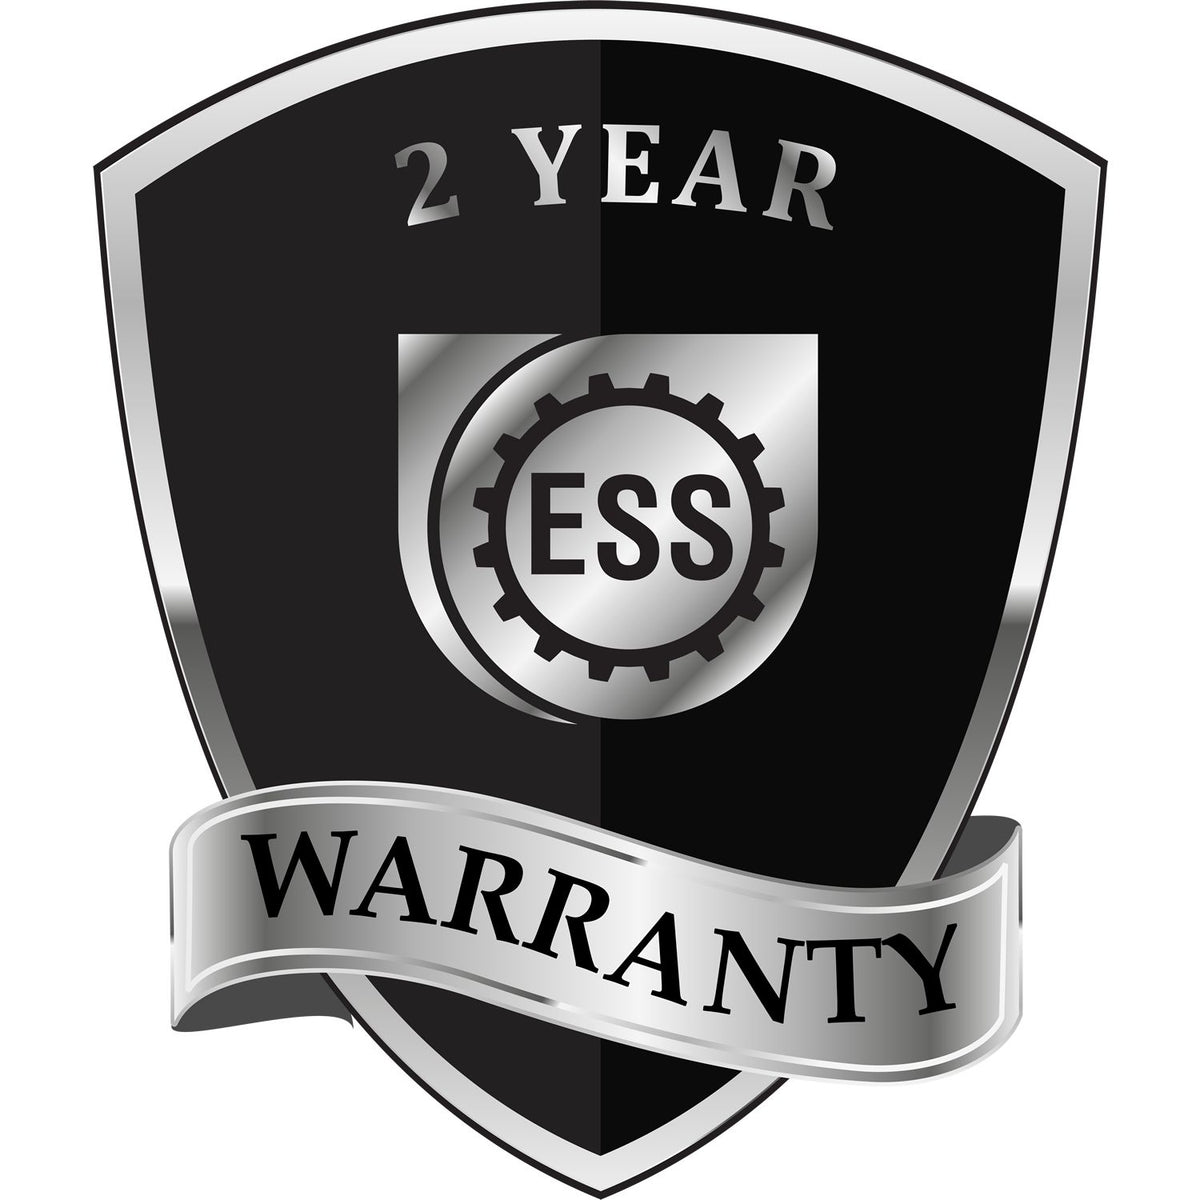 A badge or emblem showing a warranty icon for the Tennessee Desk Architect Embossing Seal